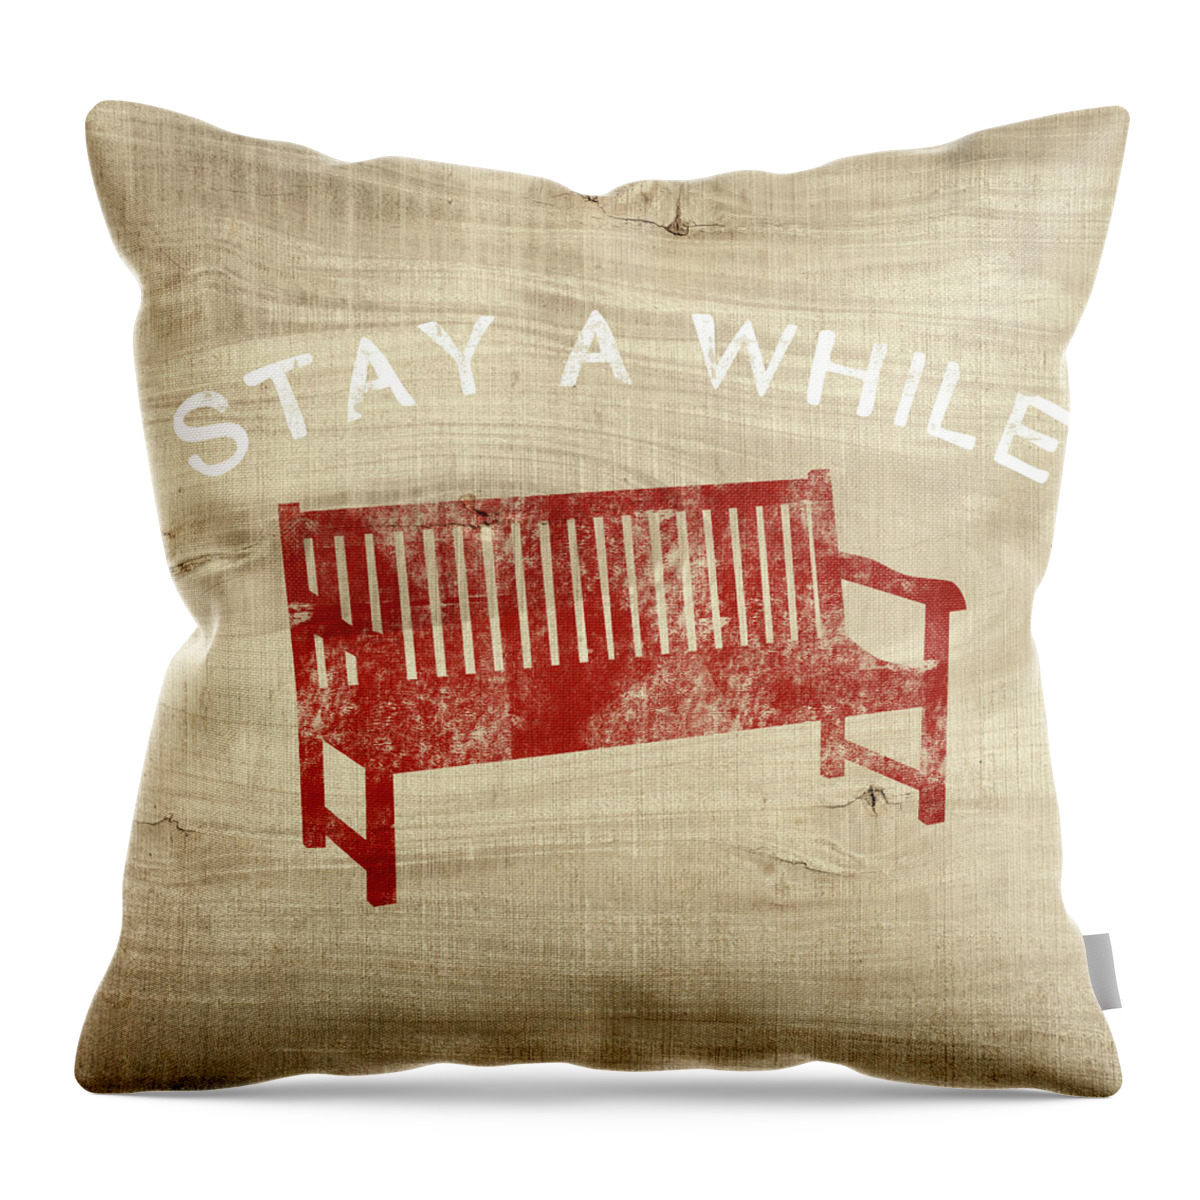 Country Throw Pillow featuring the mixed media Stay A While- Art by Linda Woods by Linda Woods